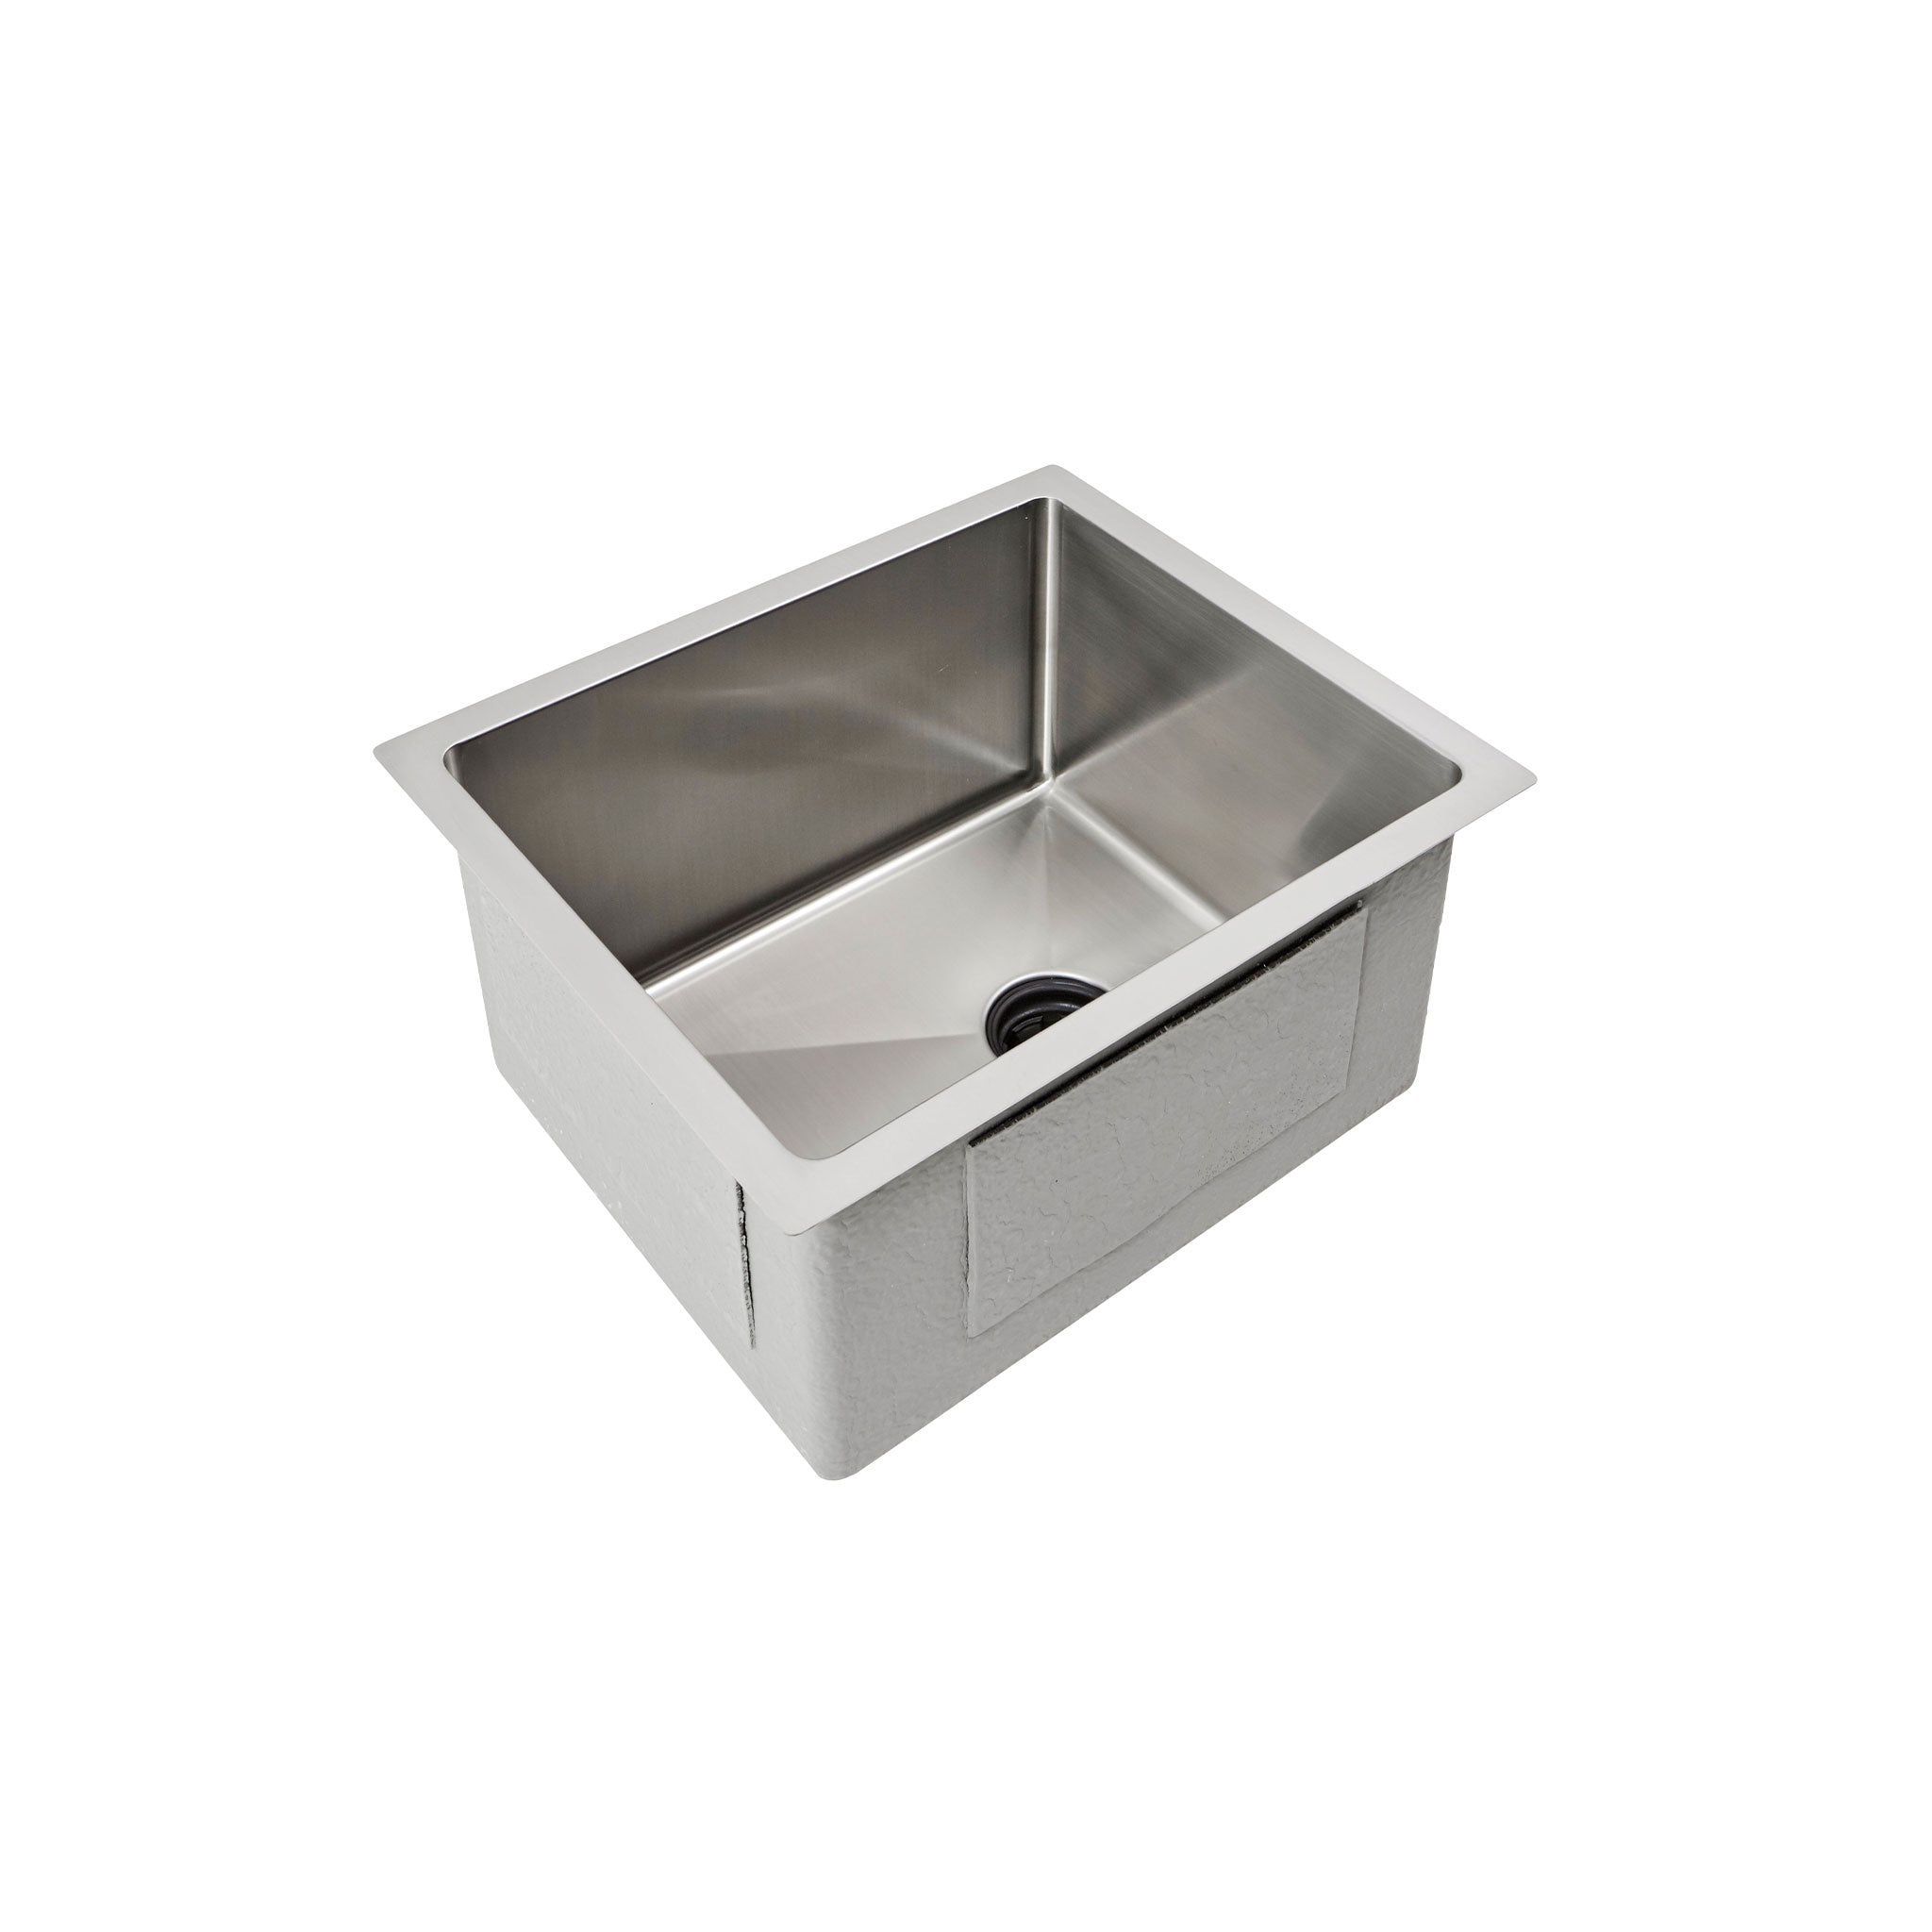 14 inch single basin stainless steel undermount kitchen sink. Small sink for pantry, bar, or prep area.